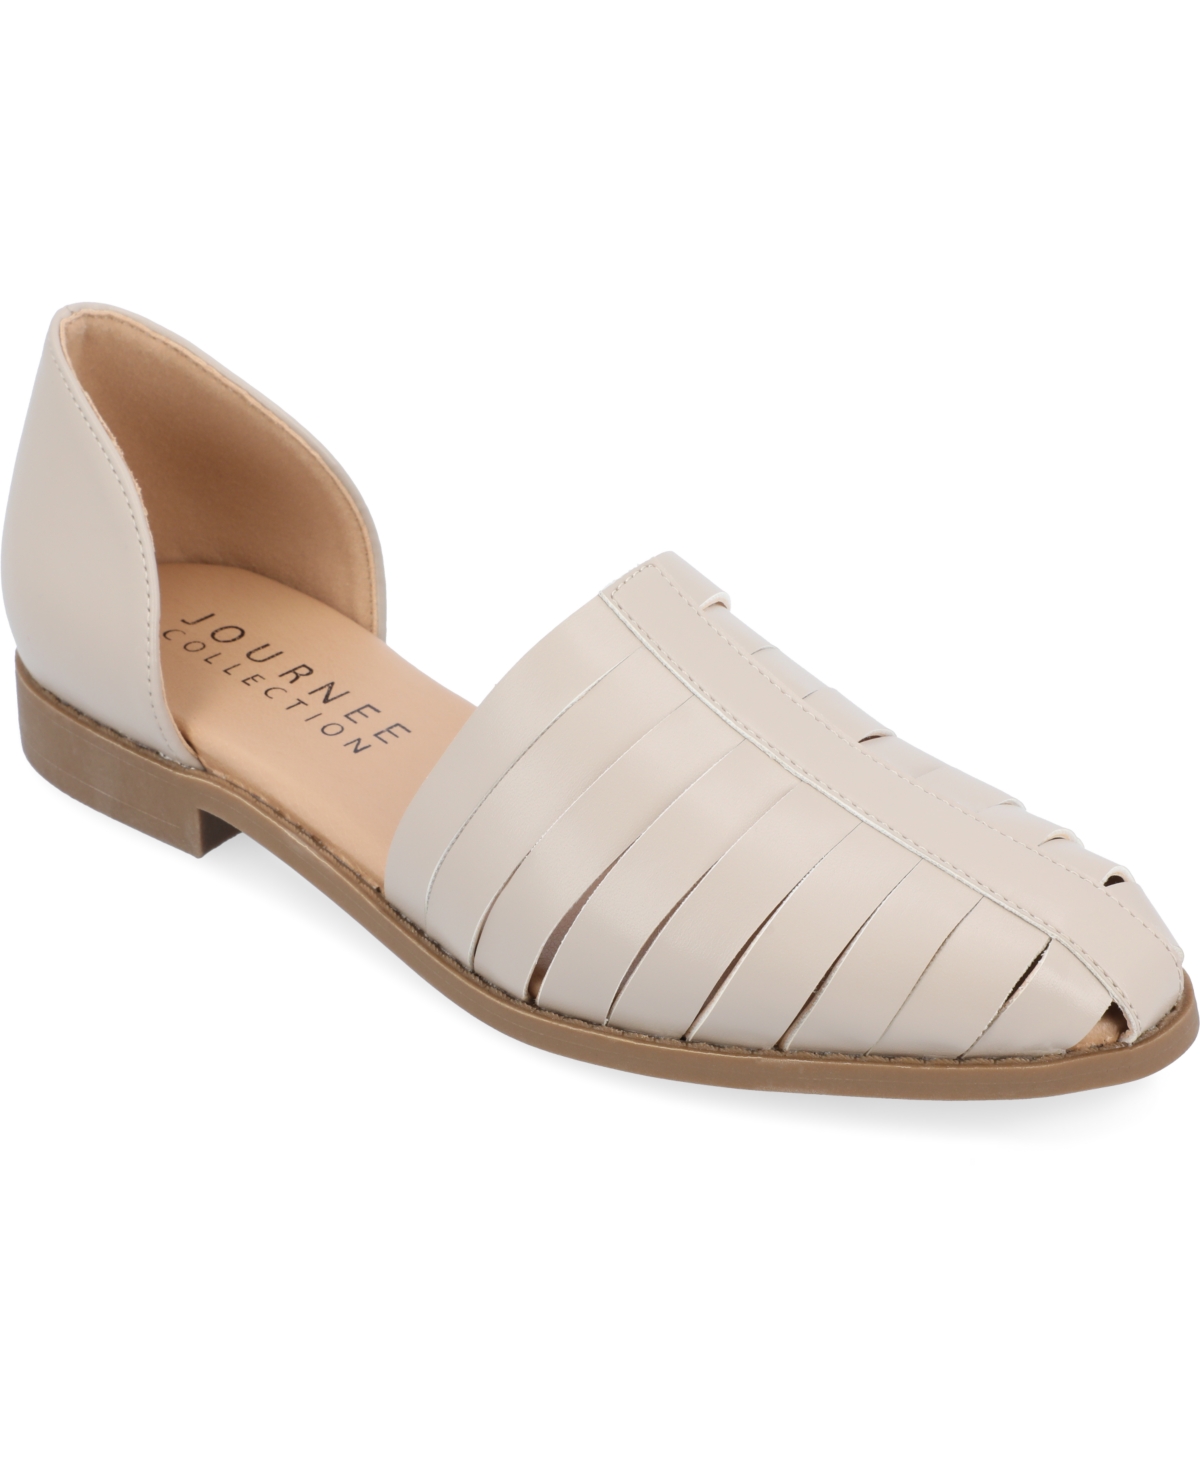 Women's Anyah Caged Two-Piece Flats - White